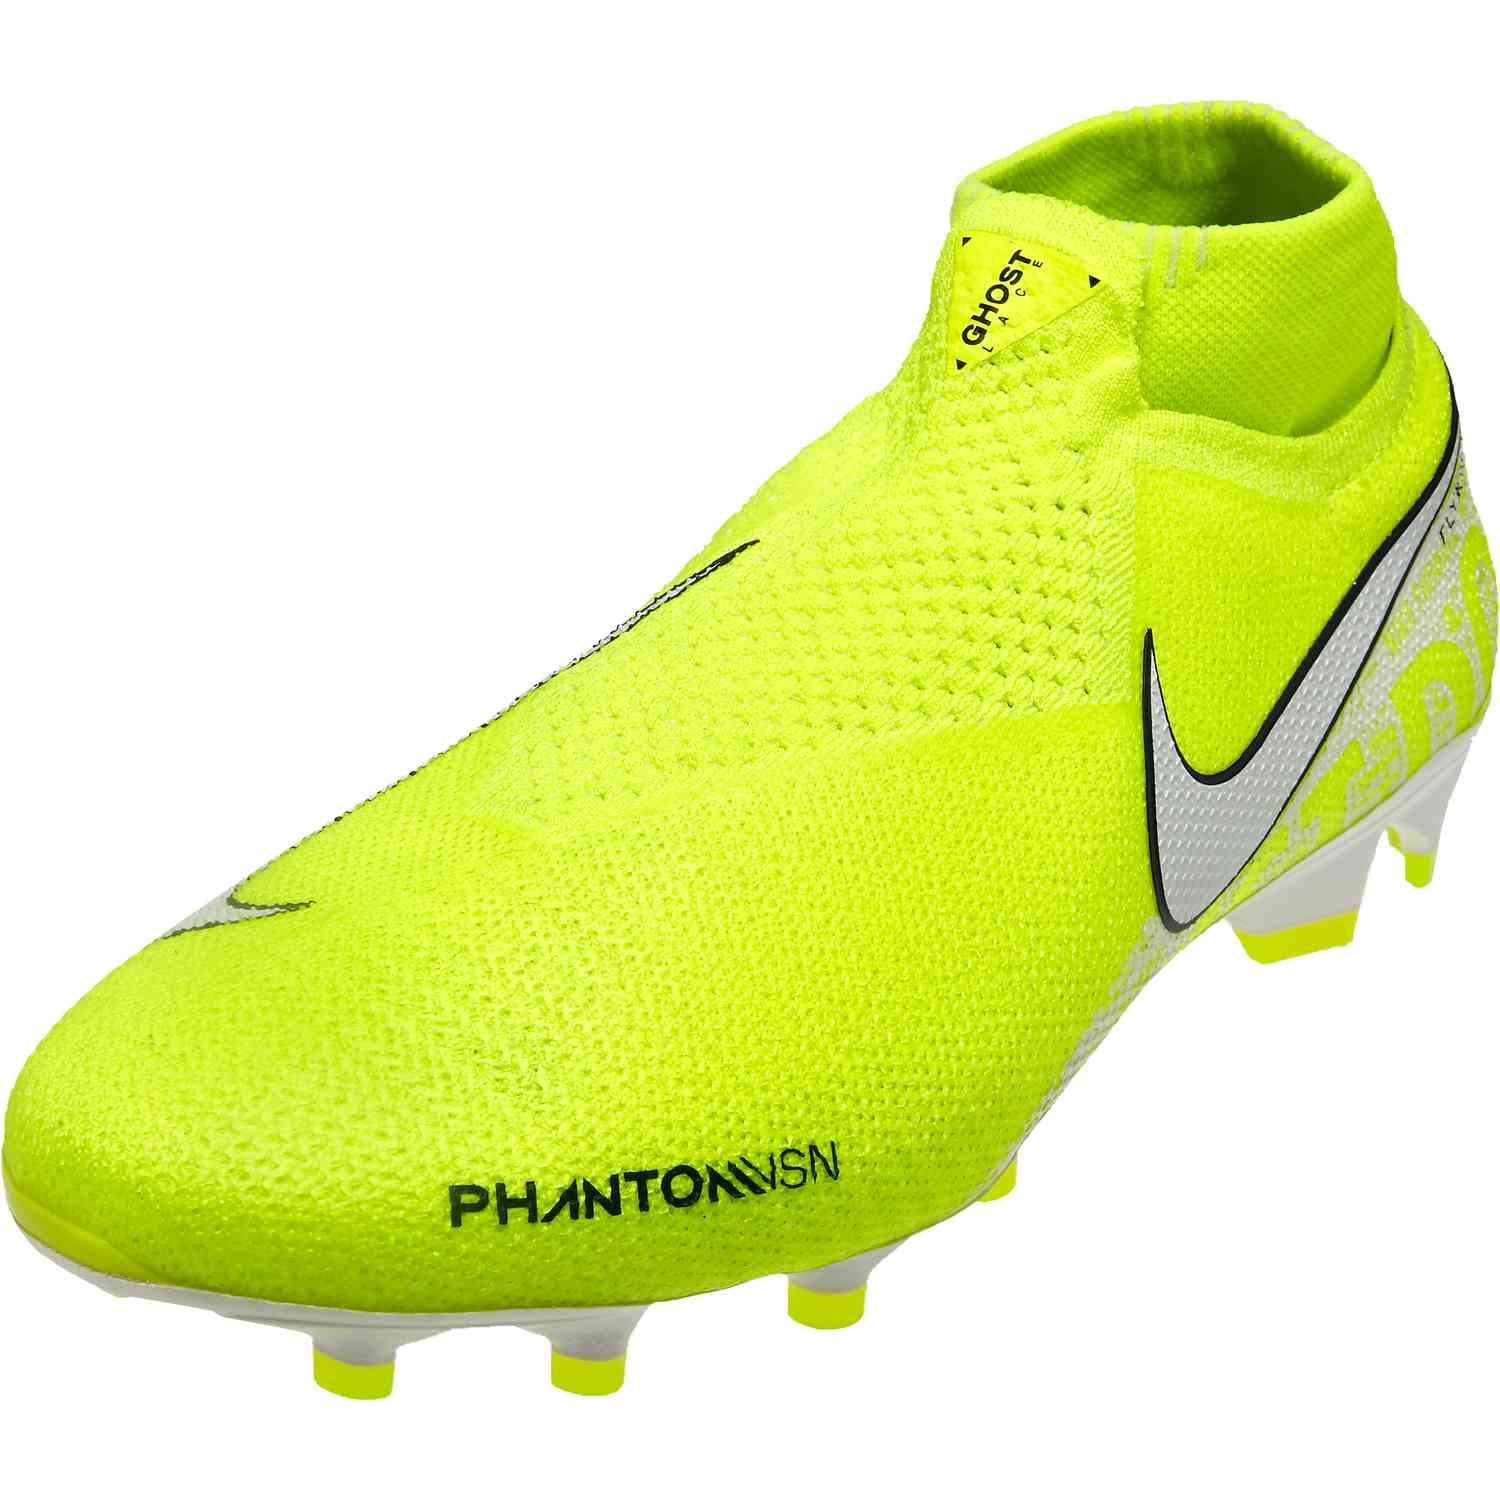 You are currently viewing The Top 10 Best Nike Football Boots/Soccer Cleats